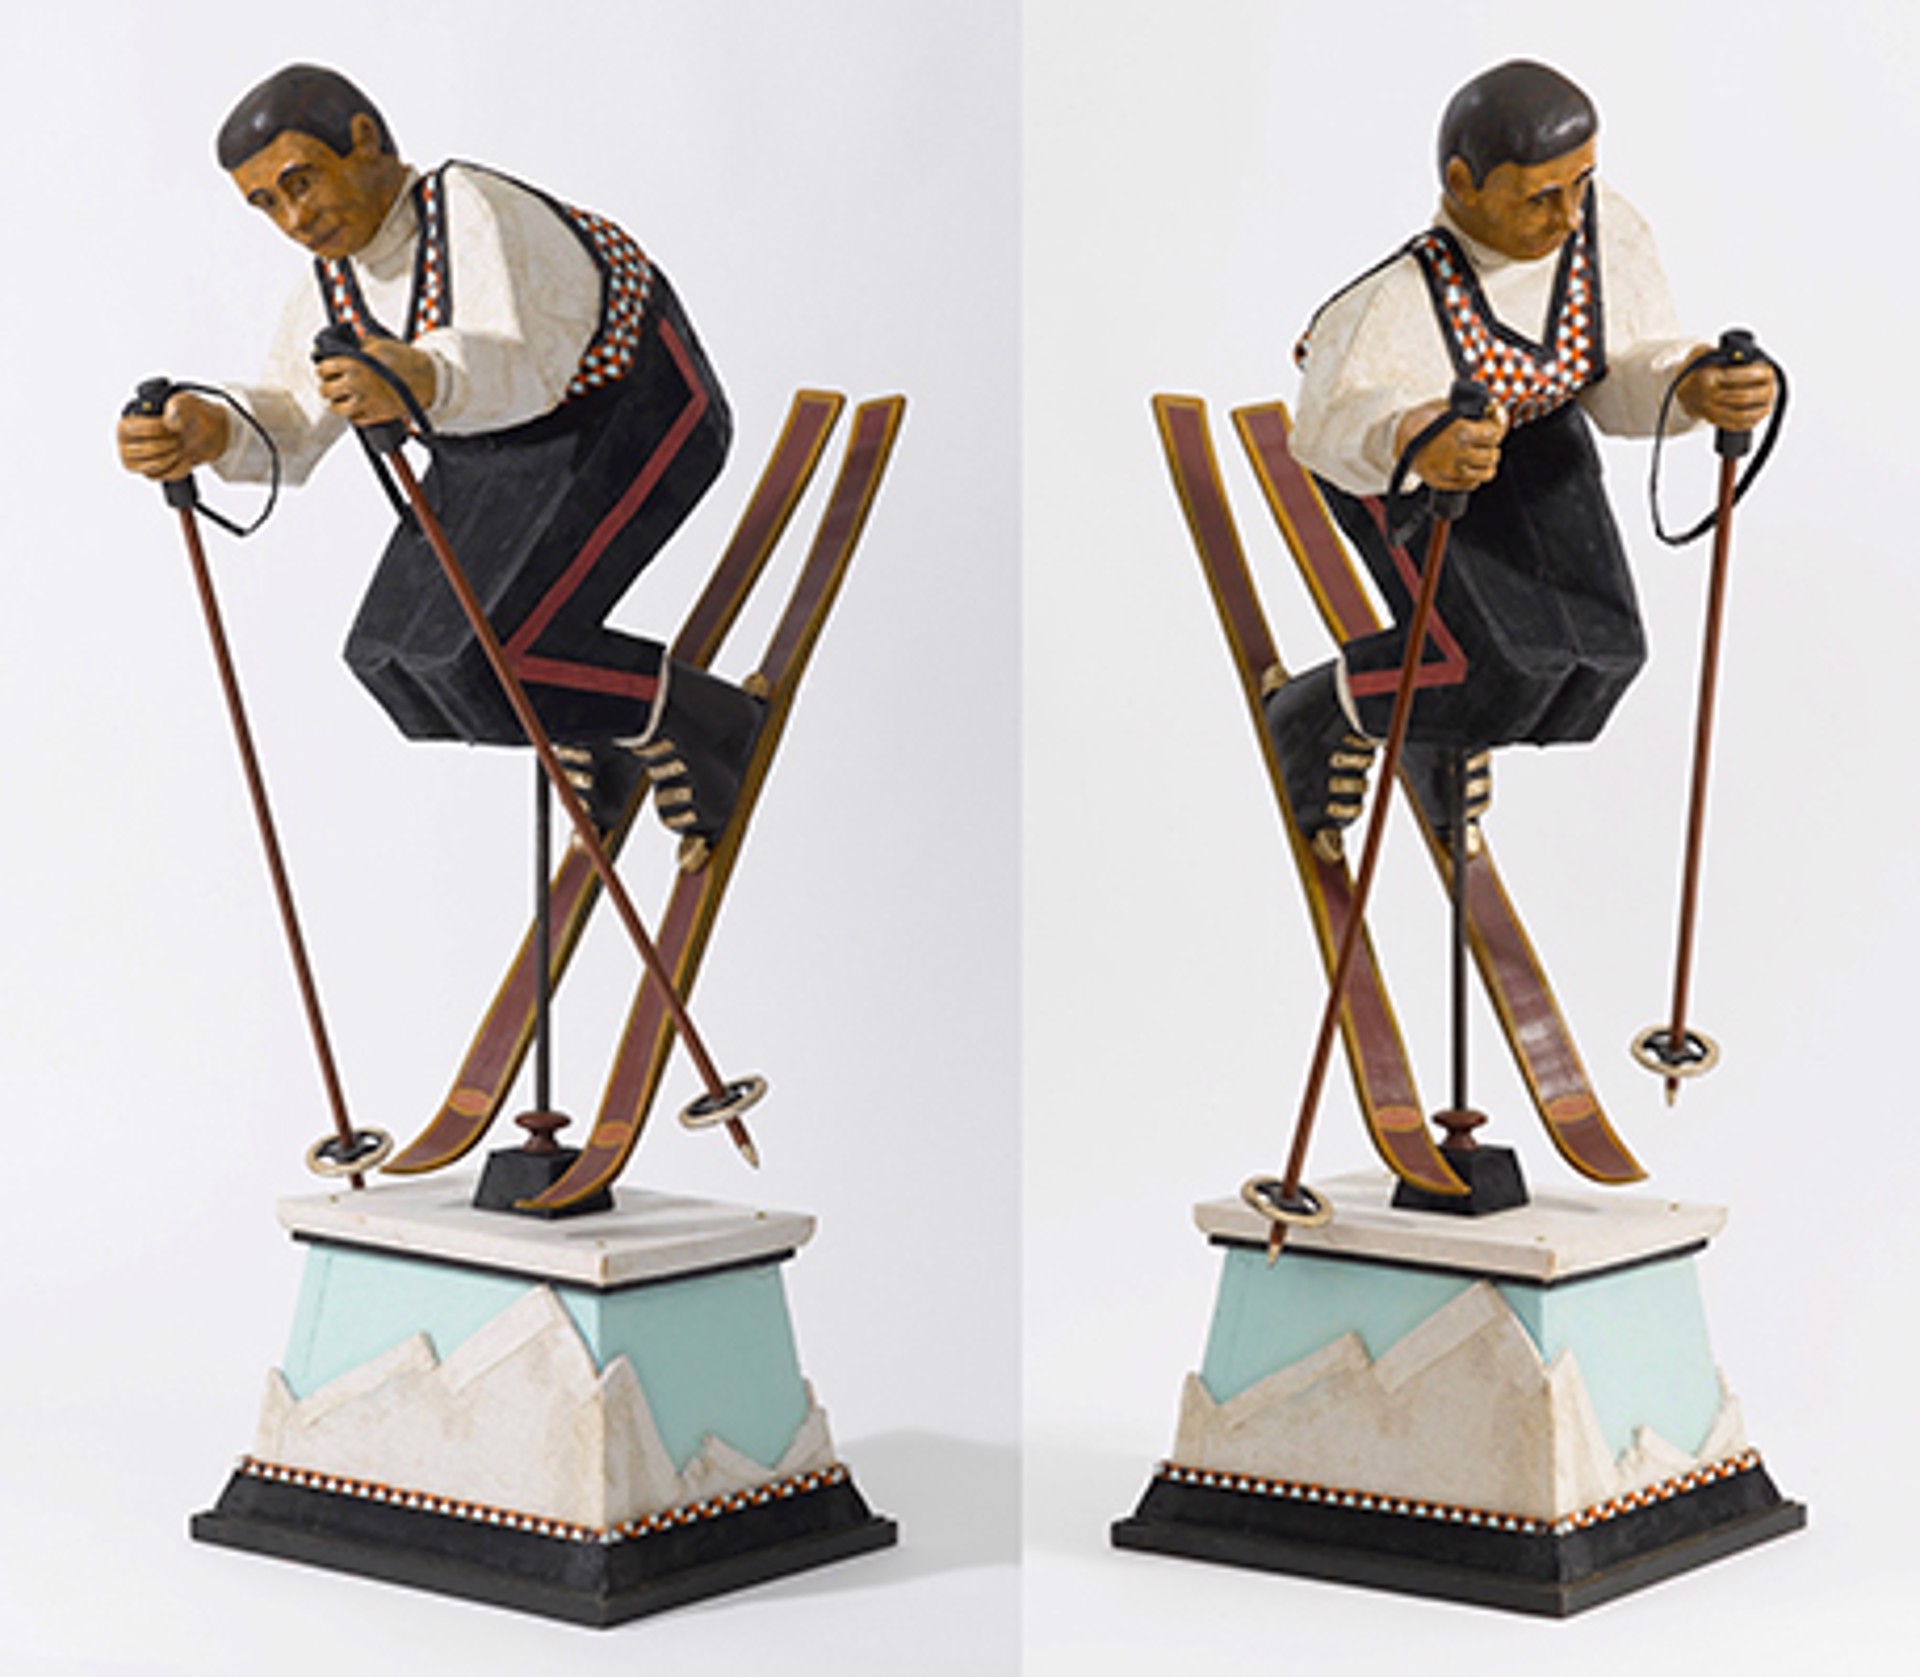 DOWNHILL SKIER by HARVEY PETERSON